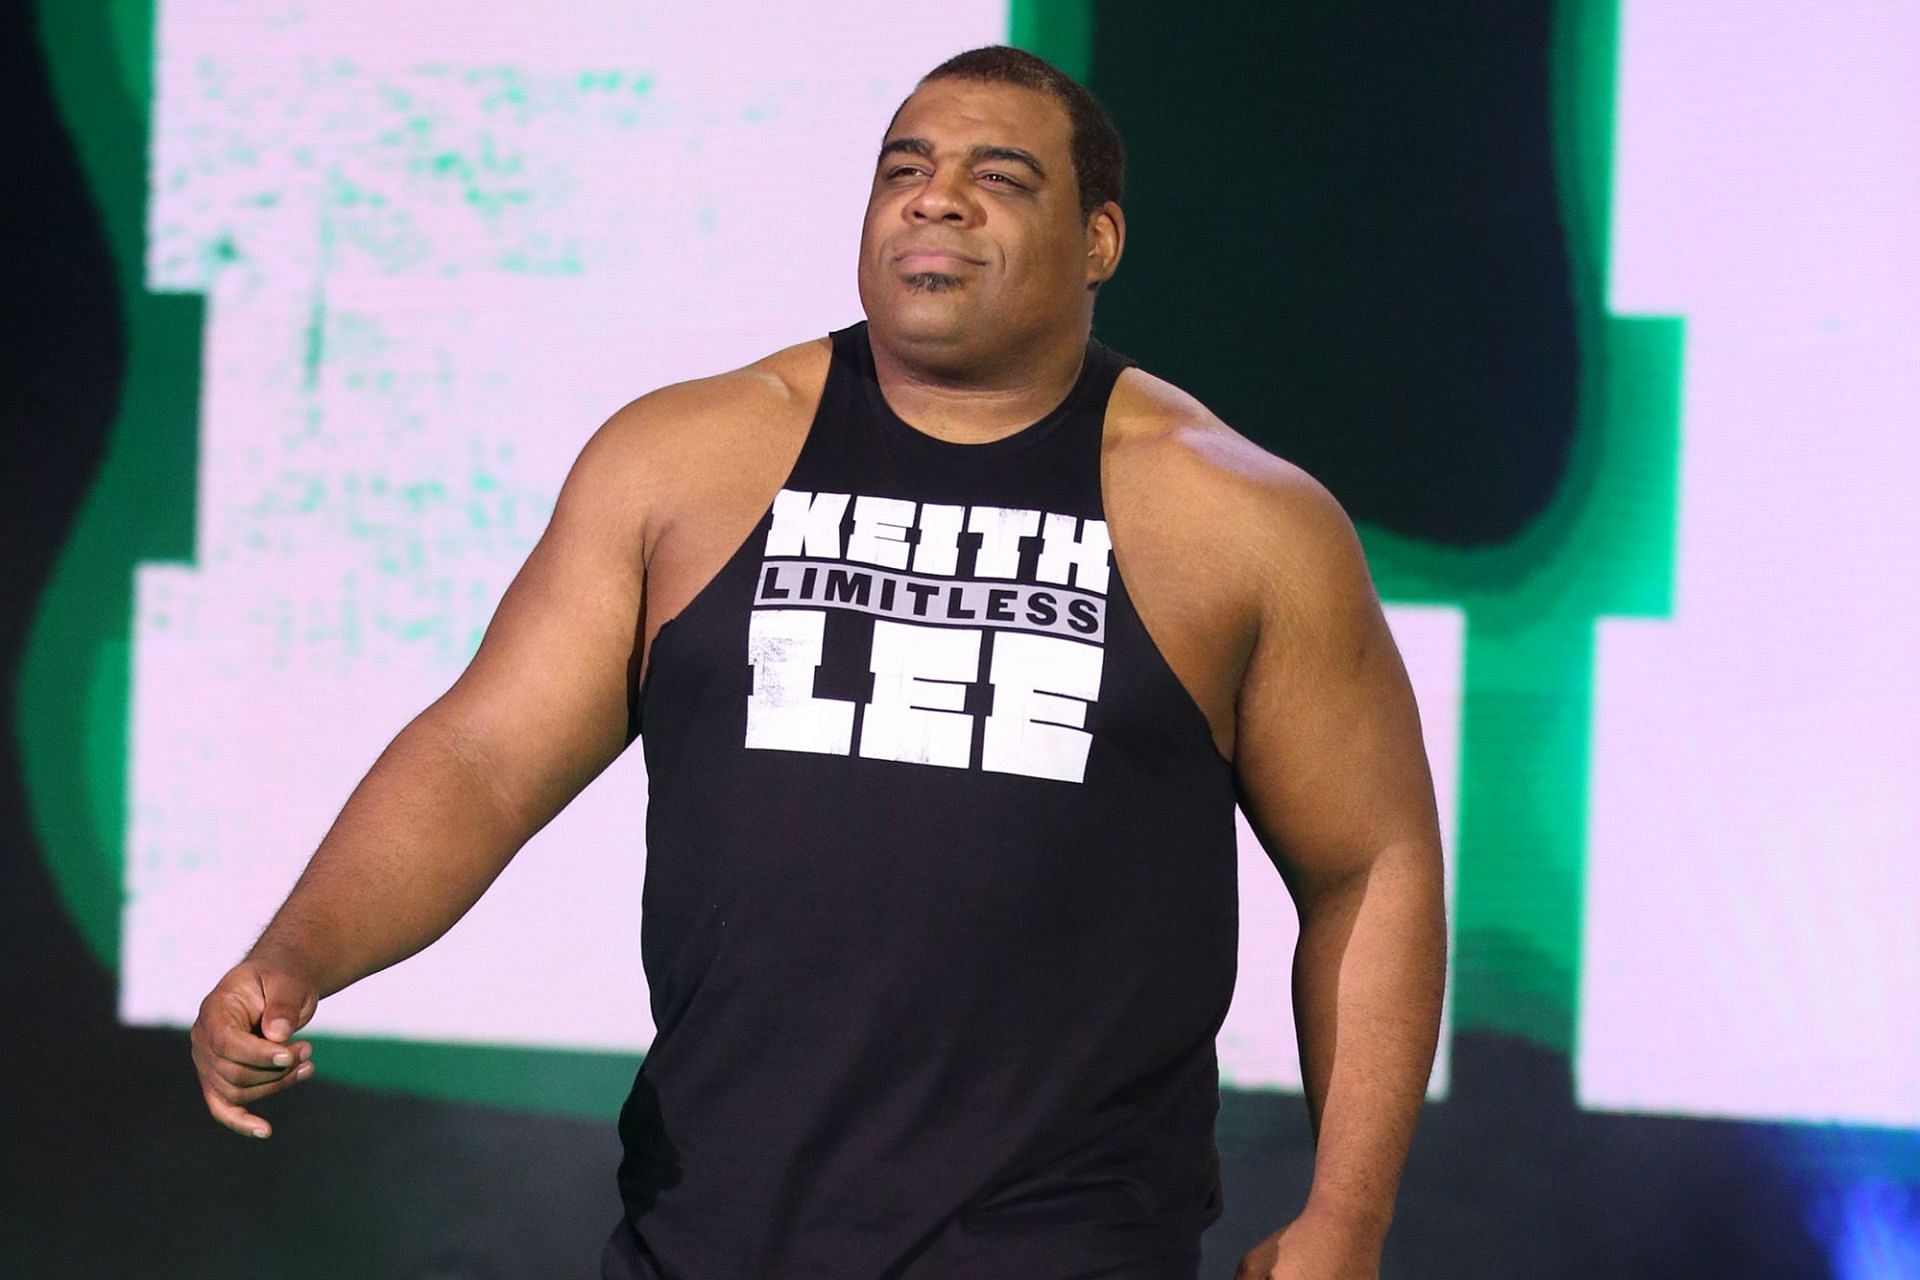 Keith Lee awaits his chance to prove WWE management wrong in 2022.